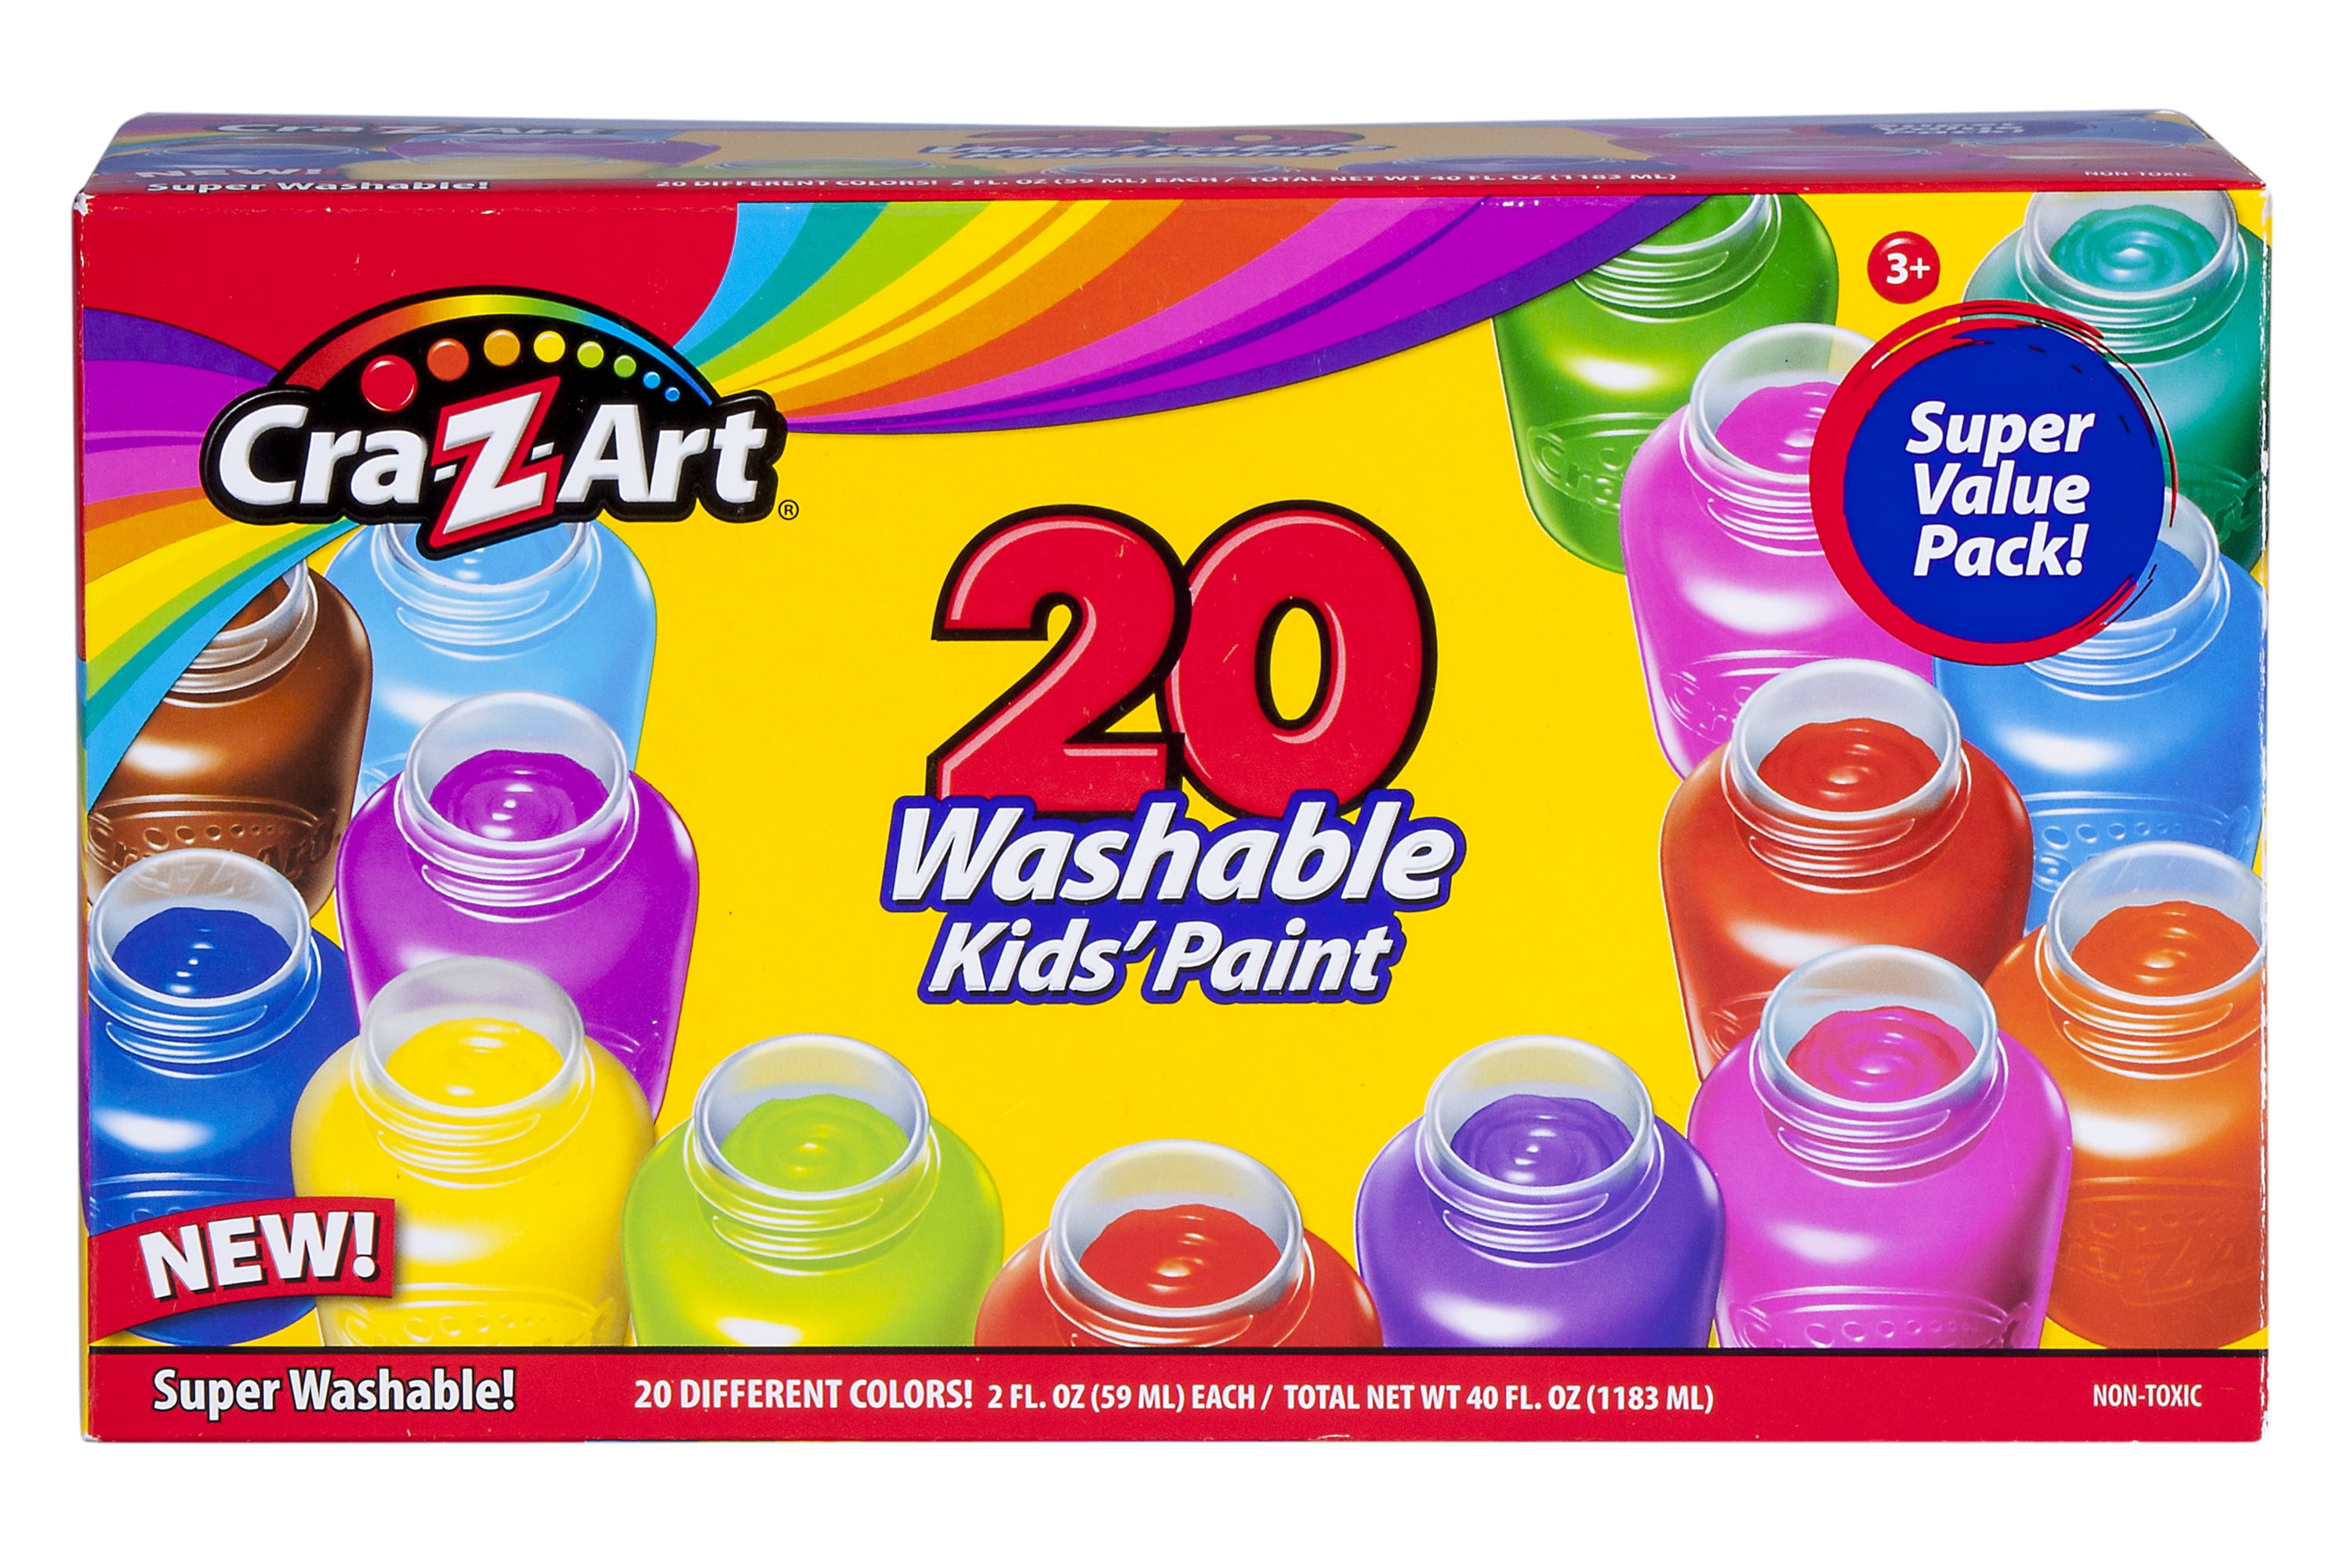  ColorCrayz Paint Set for Kids - 27 Piece Art Kit for Girls &  Boys Ages 4-10 - Non-Toxic Washable Painting Supplies with Canvases,  Brushes Easel Smock & More - Fun 